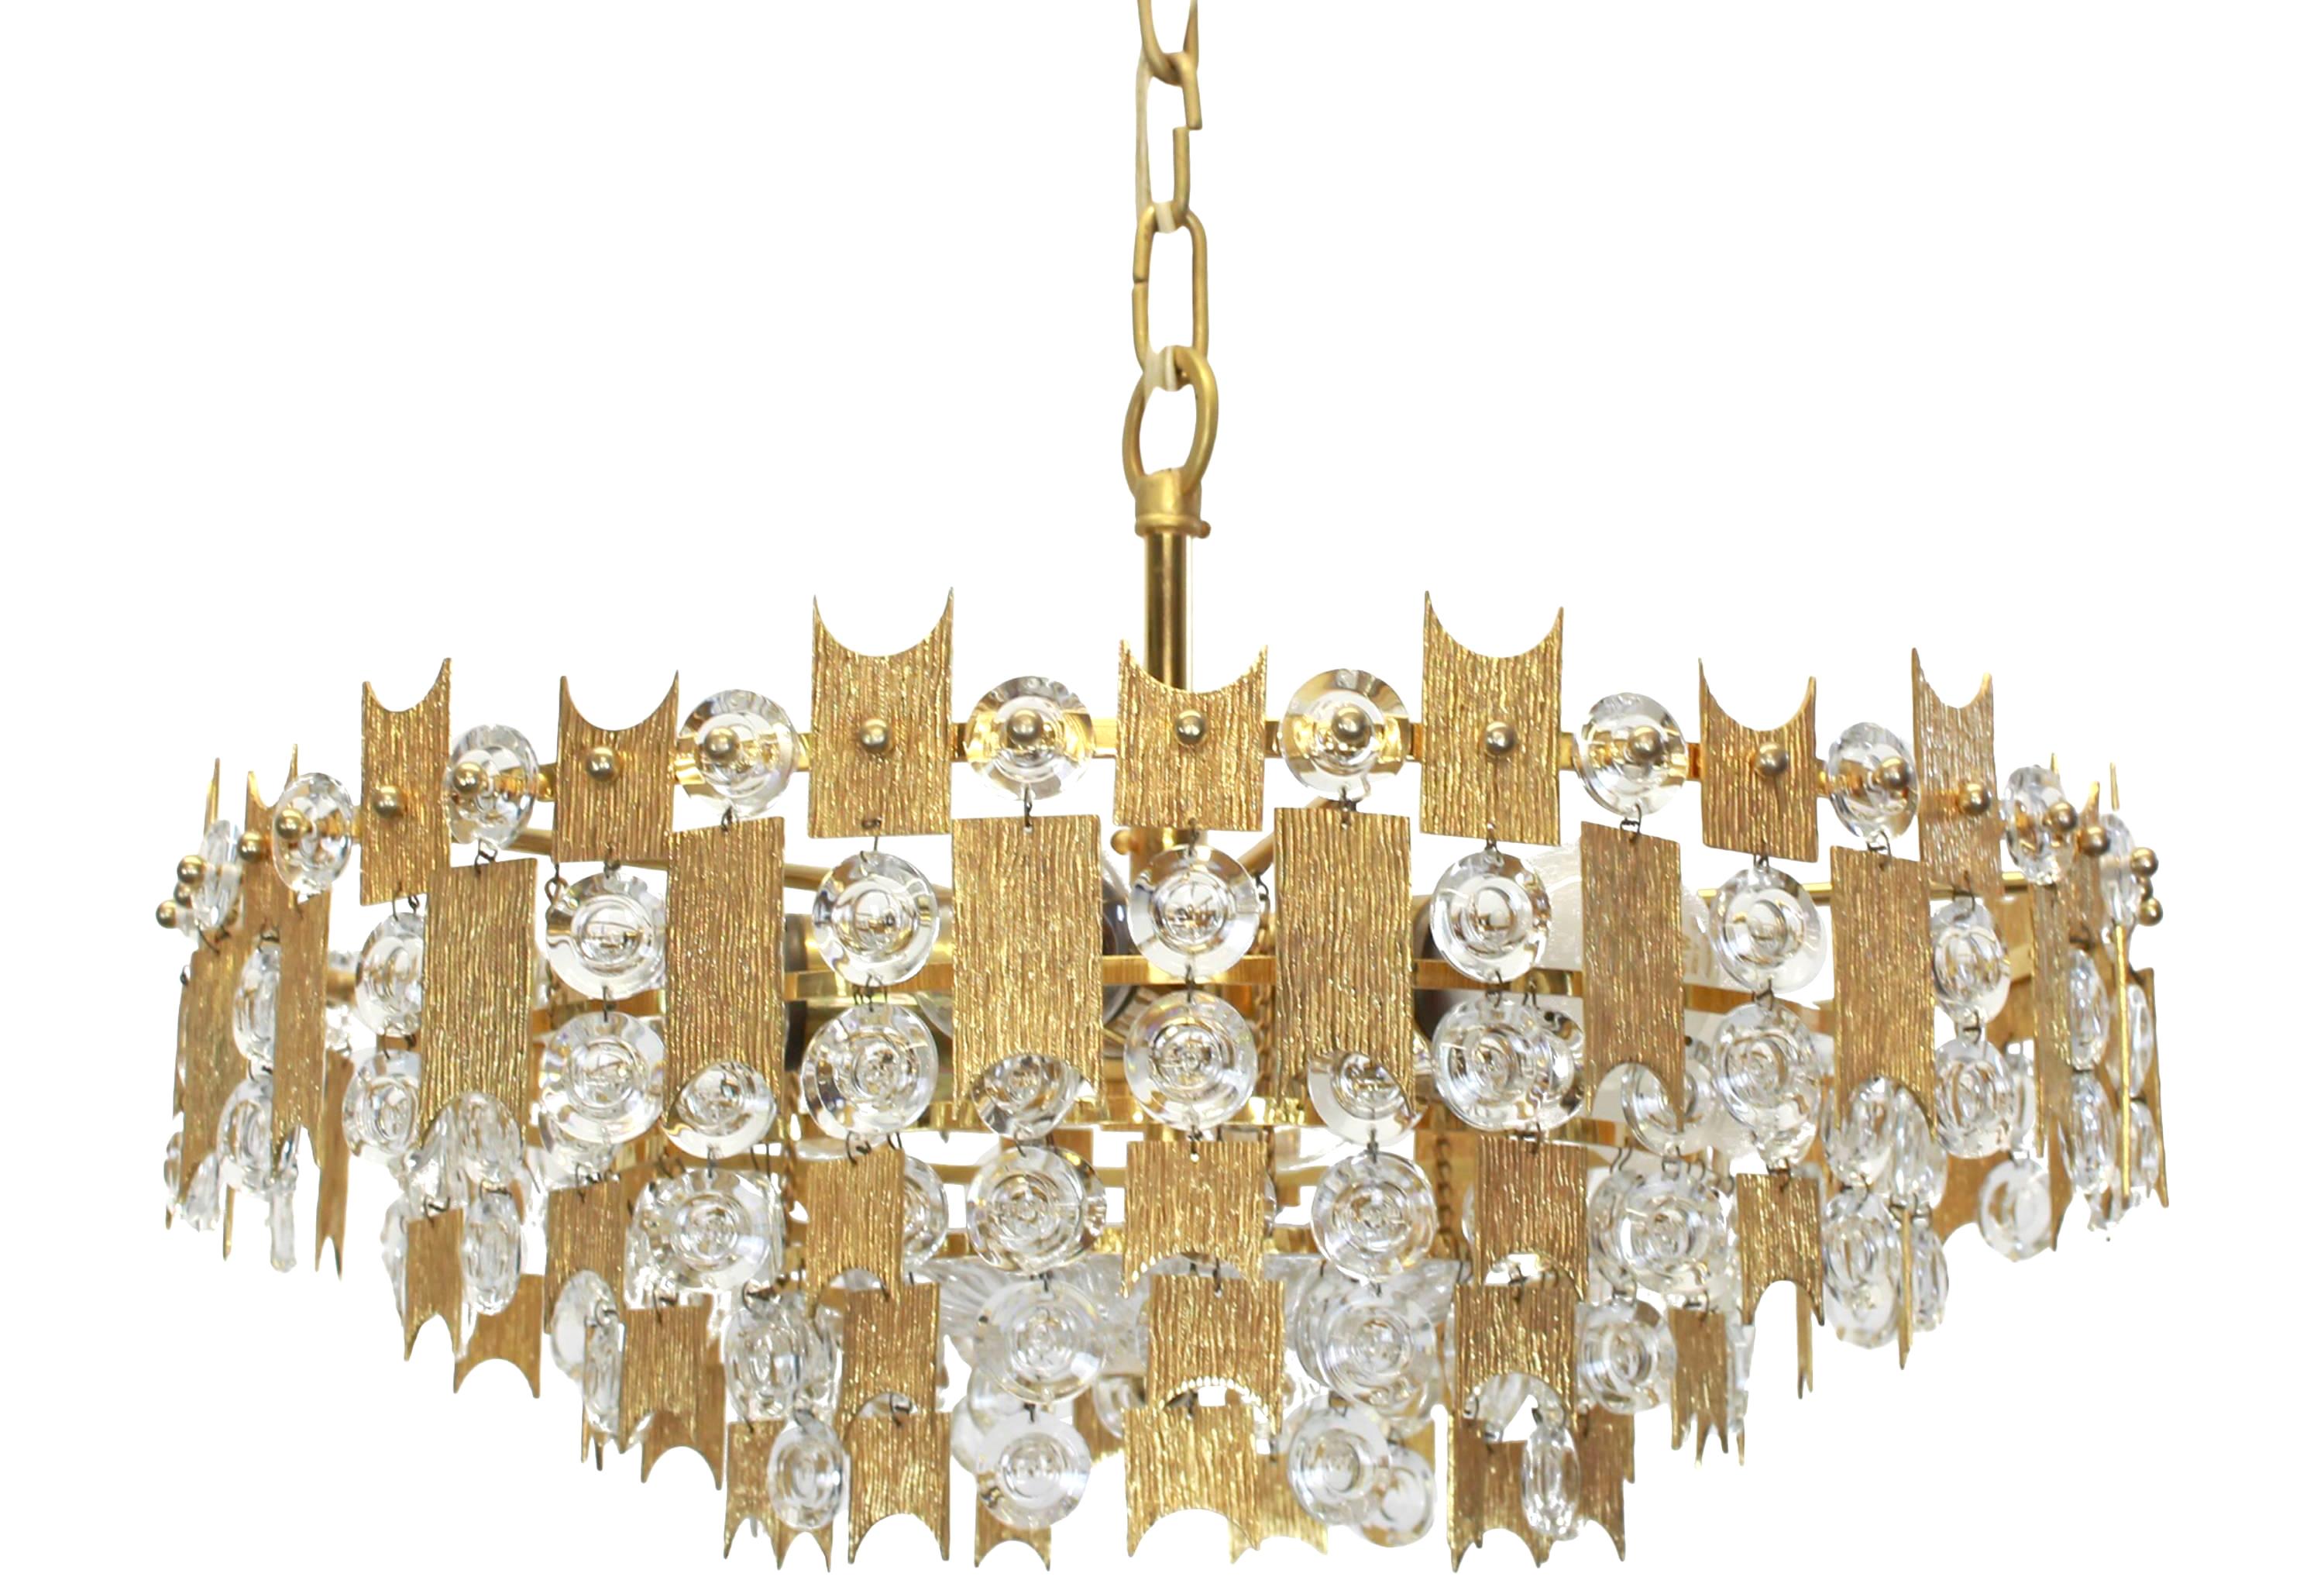 A stunning chandelier by Palwa (Palme and Walter), Germany, manufactured in the 1960s. It’s composed of jewel-like glass pieces and brass plates with a Brutalist relief.

Sockets: It needs six x E27 standard bulbs to illuminate.
Light bulbs are